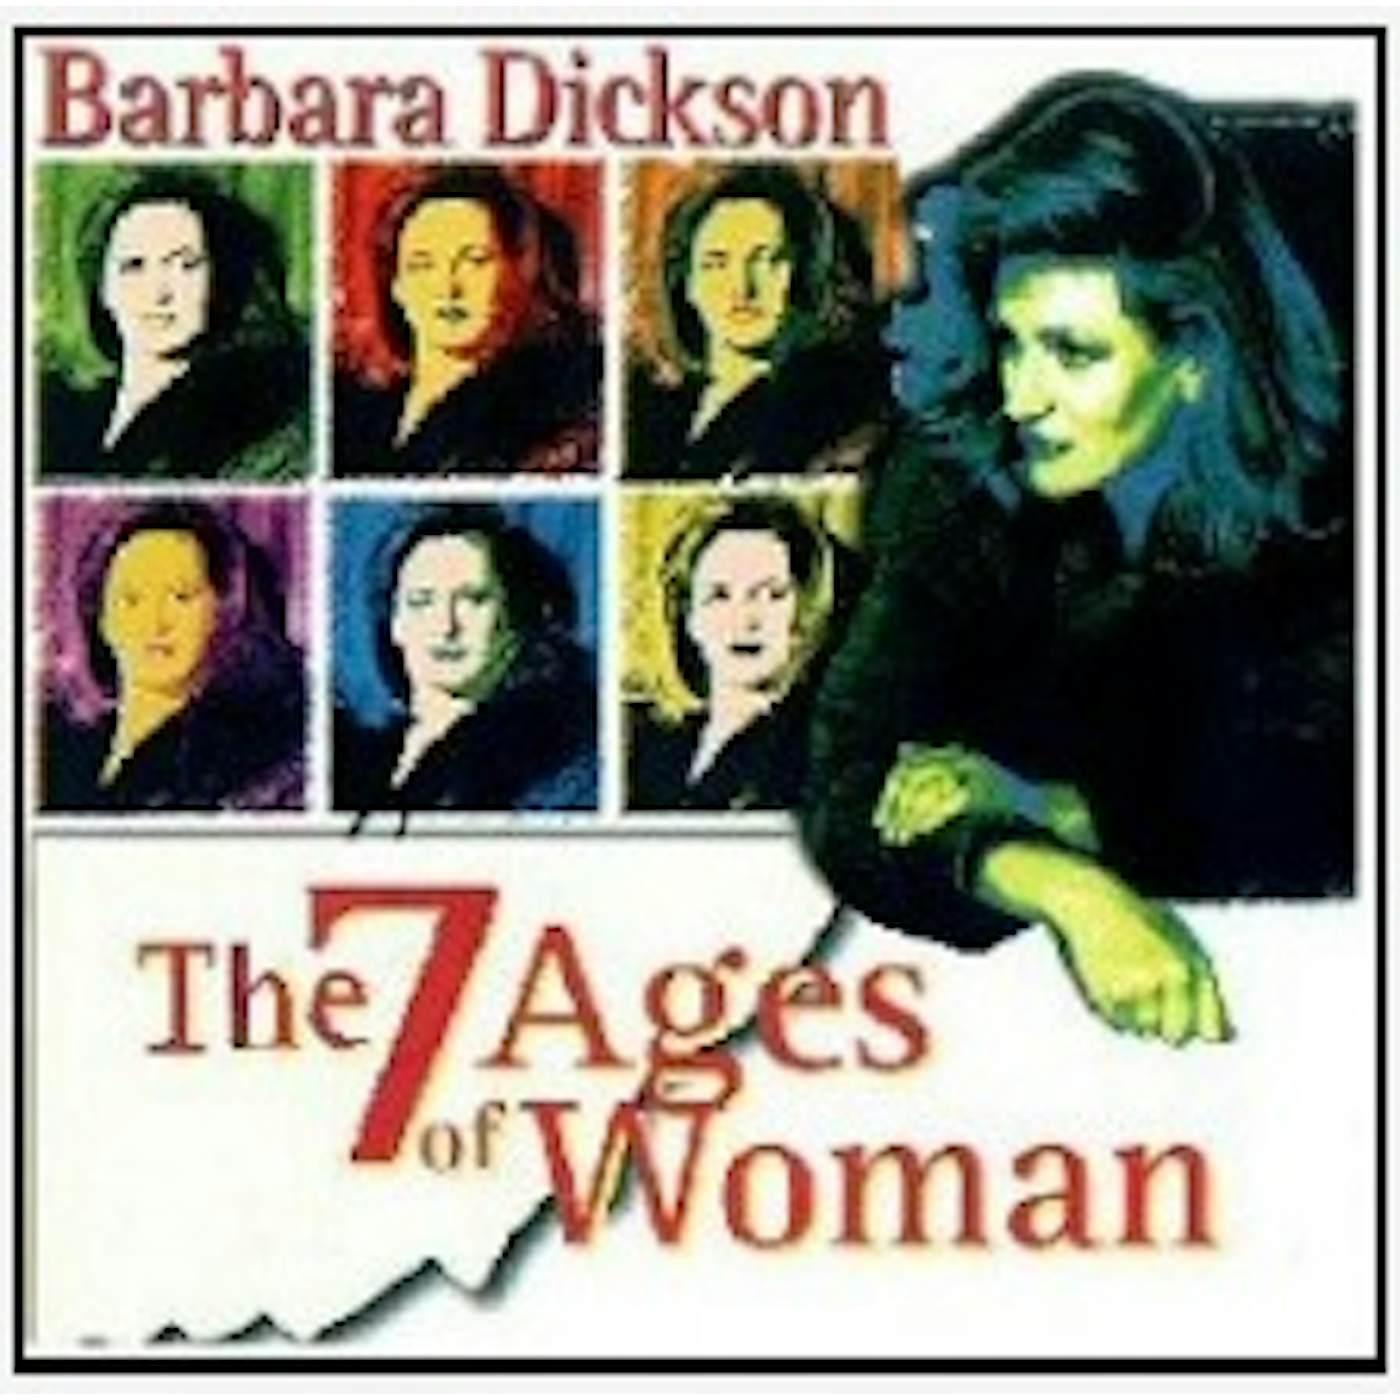 Barbara Dickson 7 AGES OF WOMAN CD